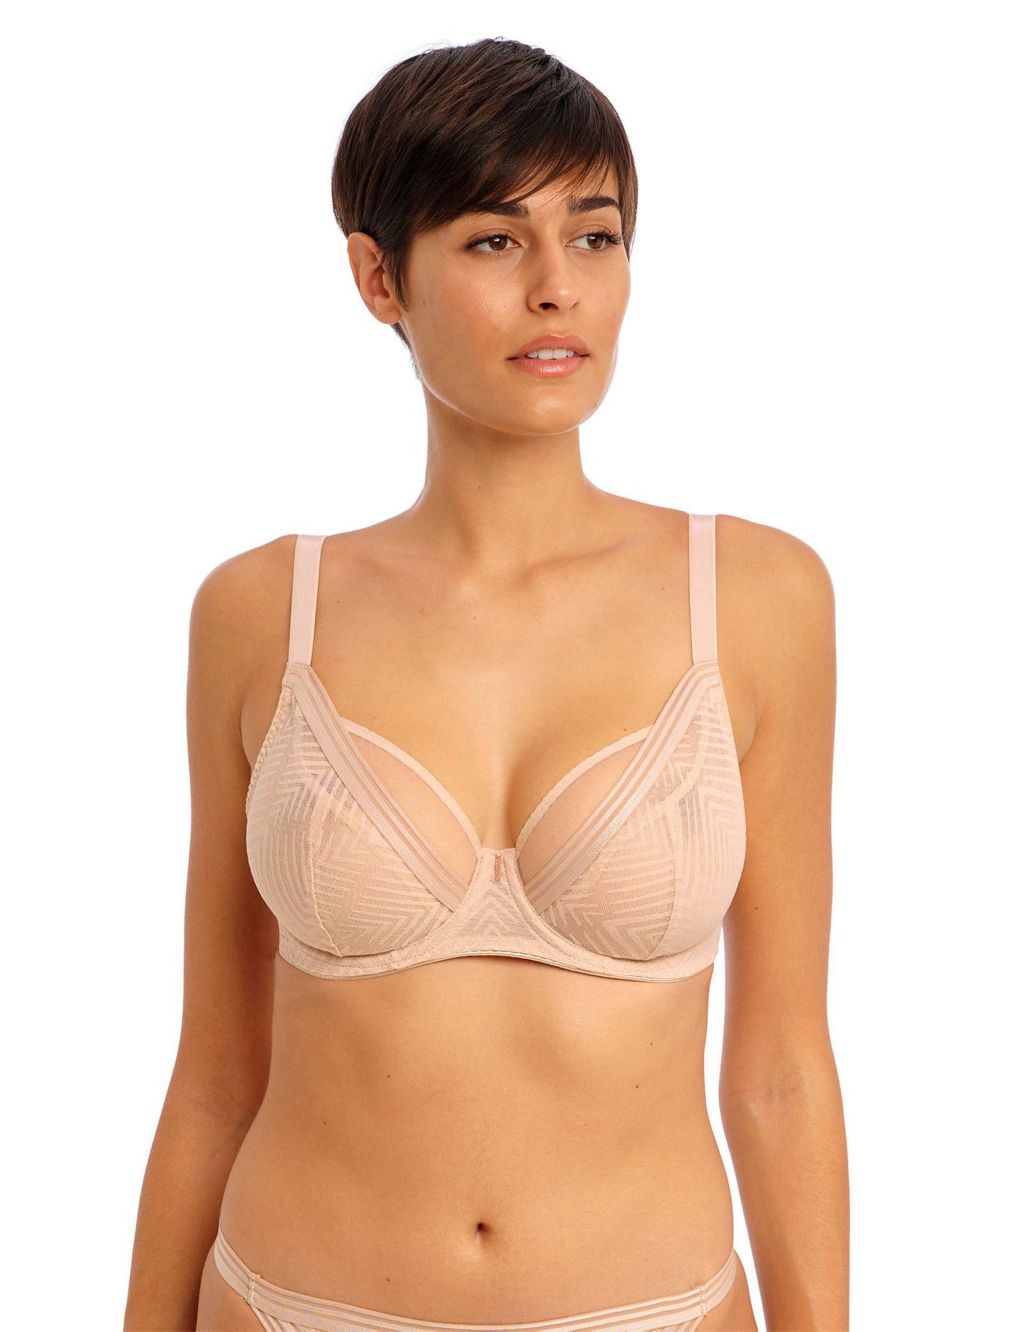 Tailored Geometric Mesh Lace Wired Plunge Bra D-H image 1